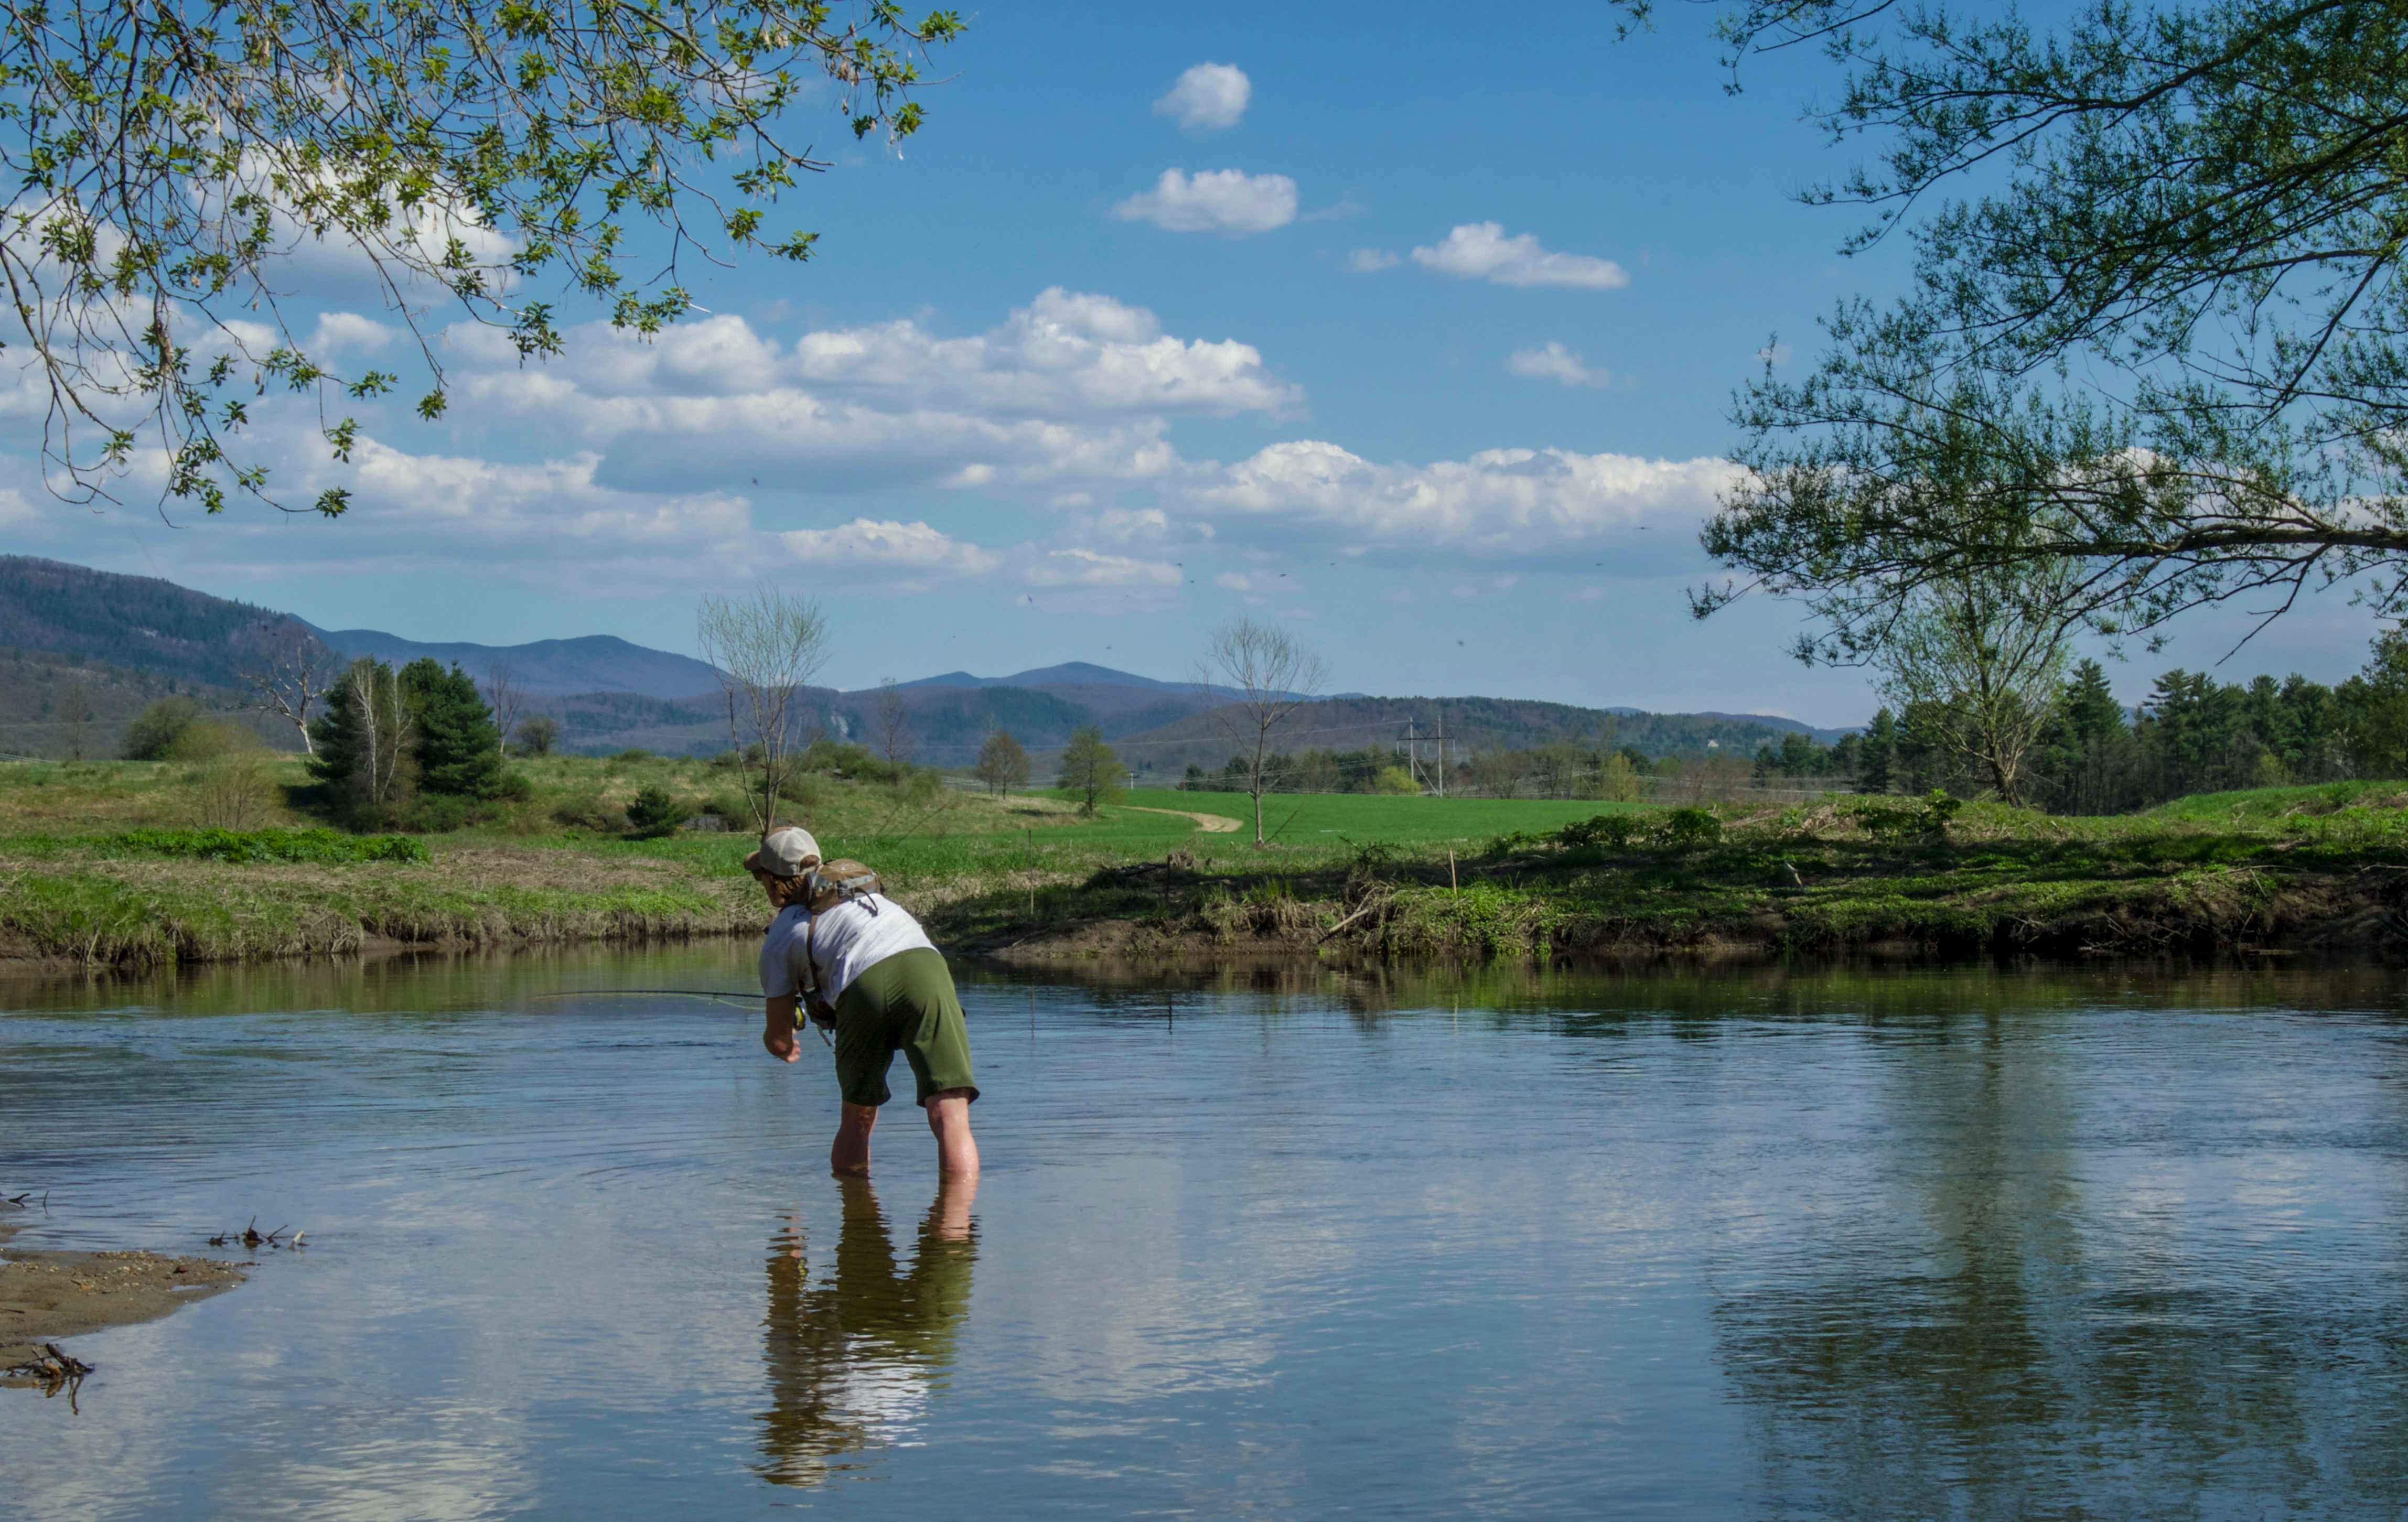 4 Resolutions to Make 2019 Your Year of Fly Fishing